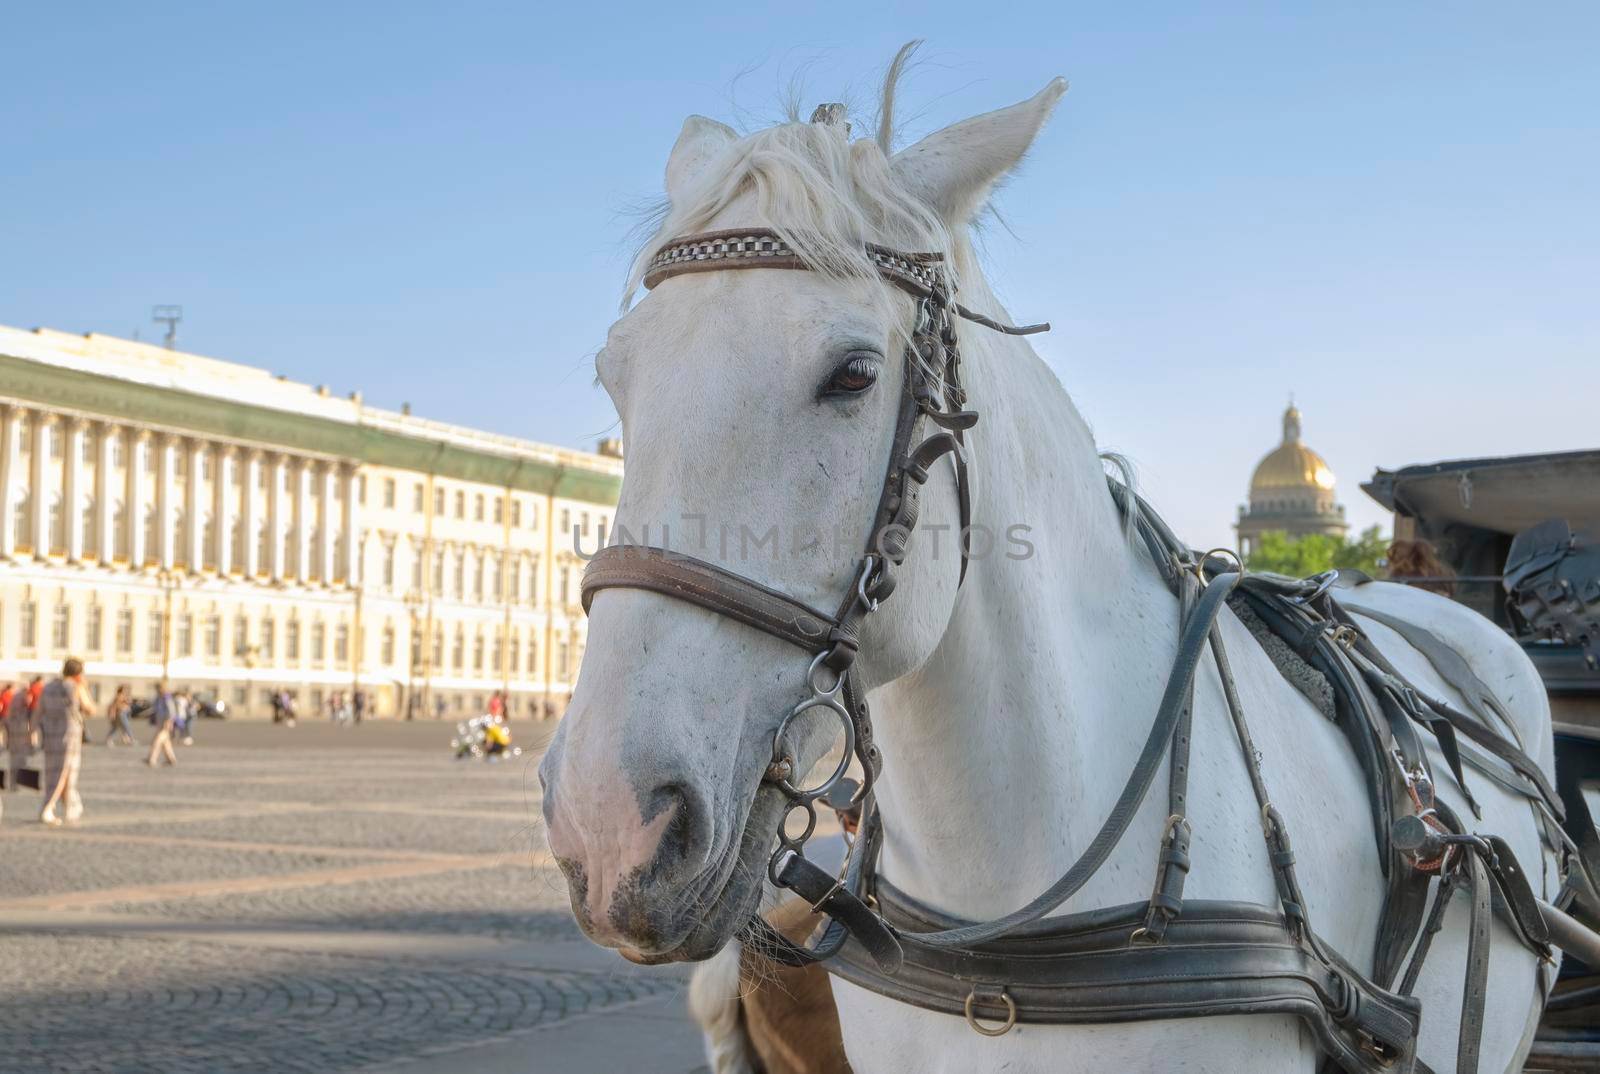 Close-up of the head of a white horse harnessed to a stroller in the city square. Selective focus. Blurred backdrop.